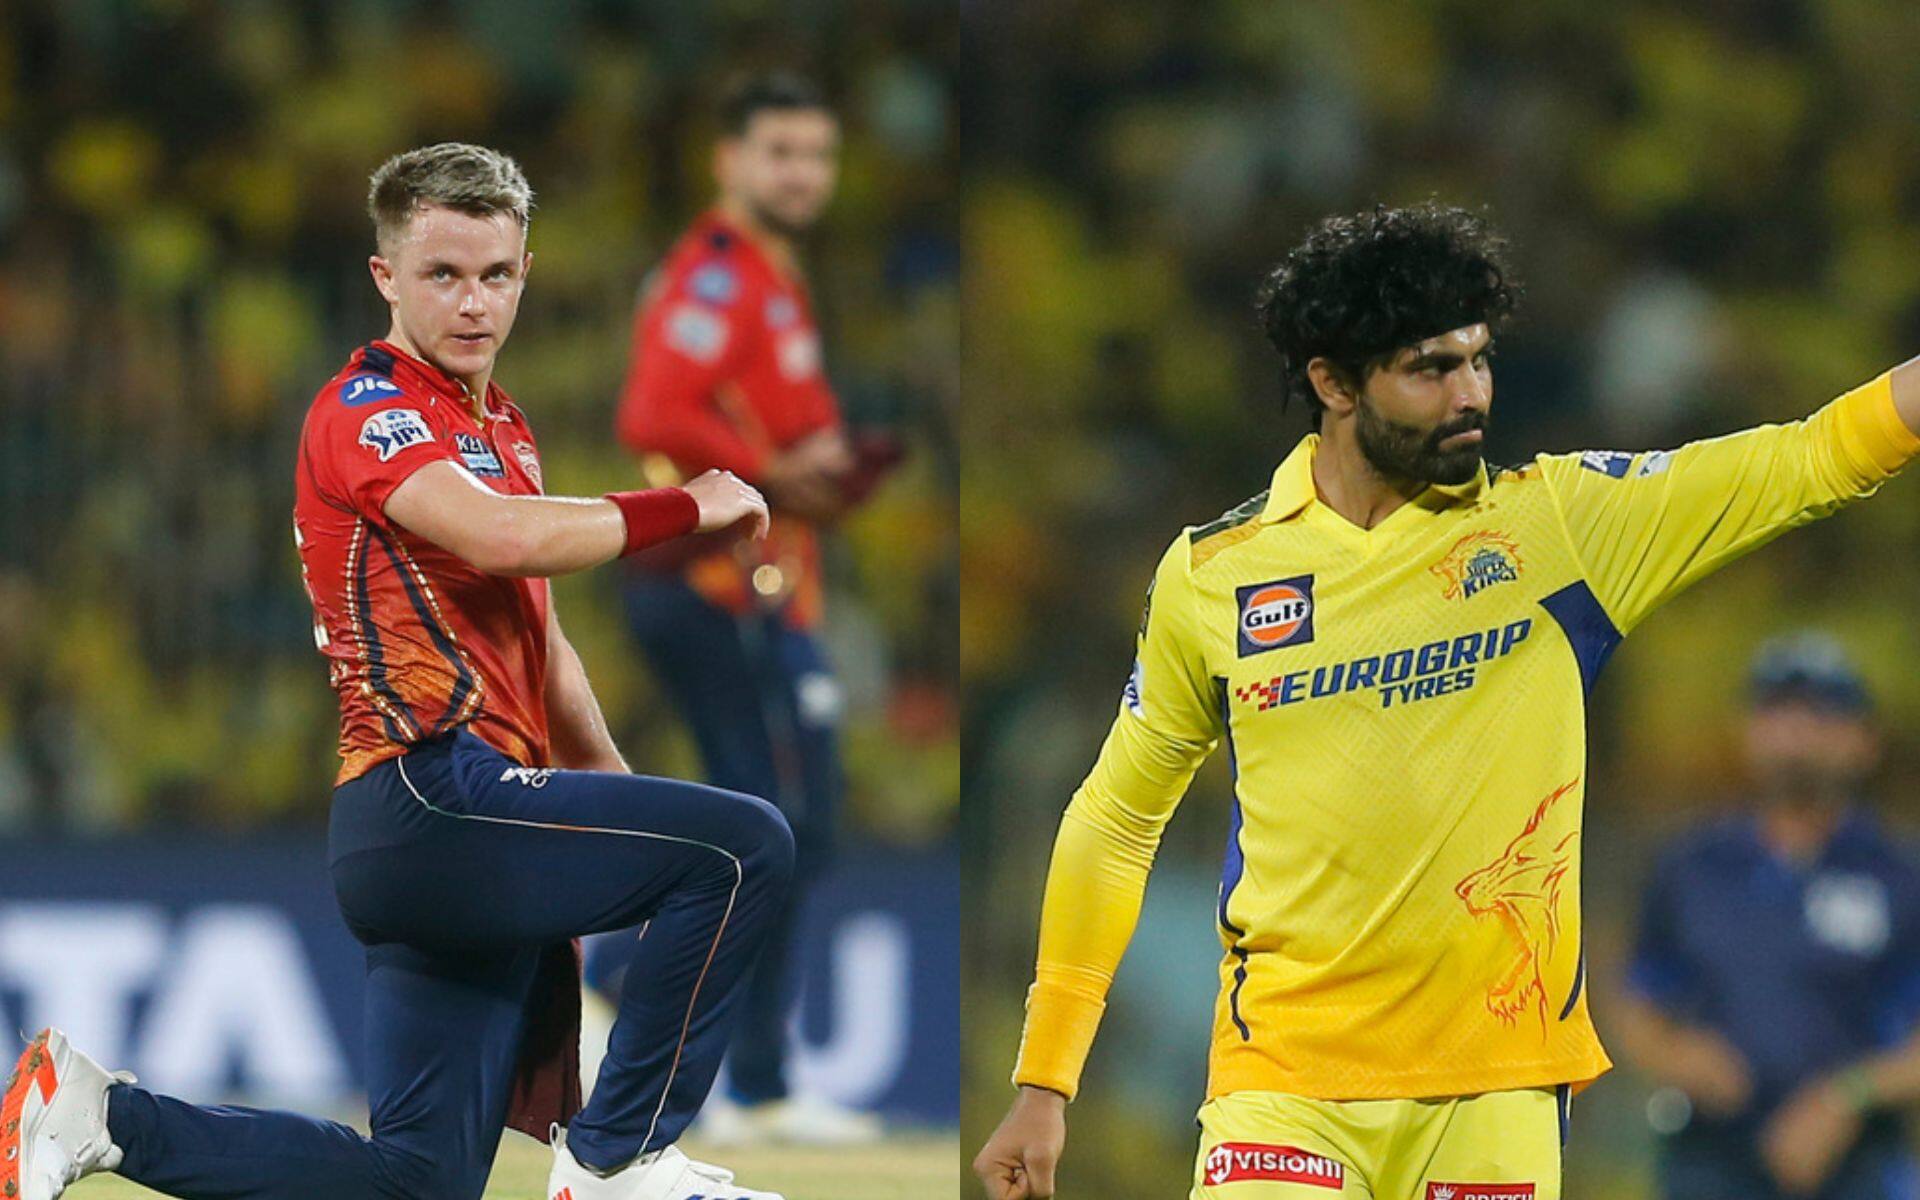 Sam Curran and Ravindra Jadeja will be crucial for their teams in the match [AP Photos]